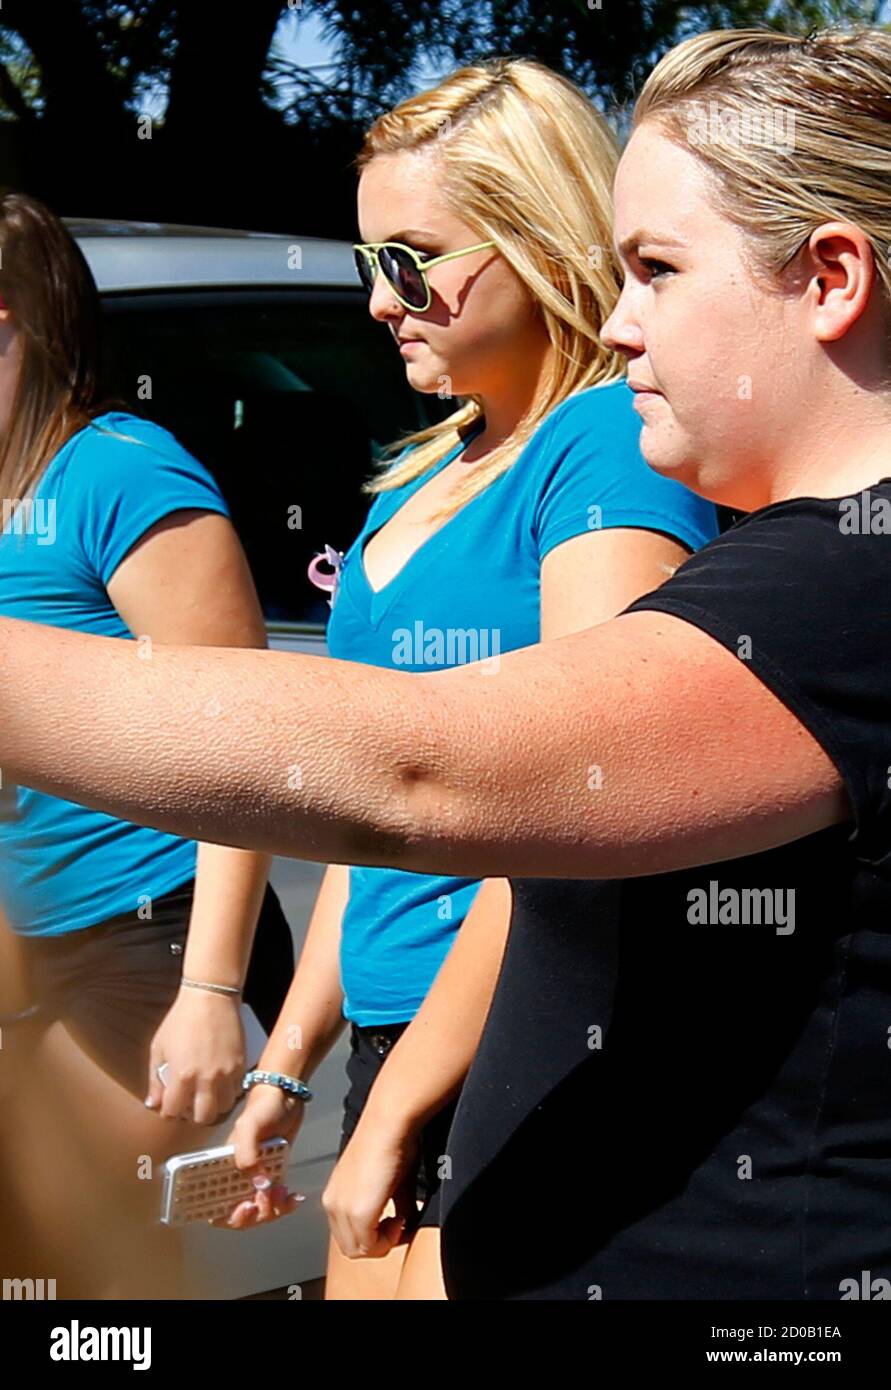 Rescued kidnapping victim Hannah Anderson (C), 16, is escorted into a local restaurant that was holding a raffle and donating profits to help cover the Anderson family funeral costs in Lakeside, California, August 15, 2013. A series of online chat posts attributed to Hannah, but which could not be immediately verified by Reuters, seem to also reveal details about the slayings of Hannah's mother, Christina Anderson, 44, and brother, Ethan, whose remains were found in the ruins of kidnapper James Lee DiMaggio's house at the outset of her disappearance. Hannah posted that they burned to death in  Stock Photo